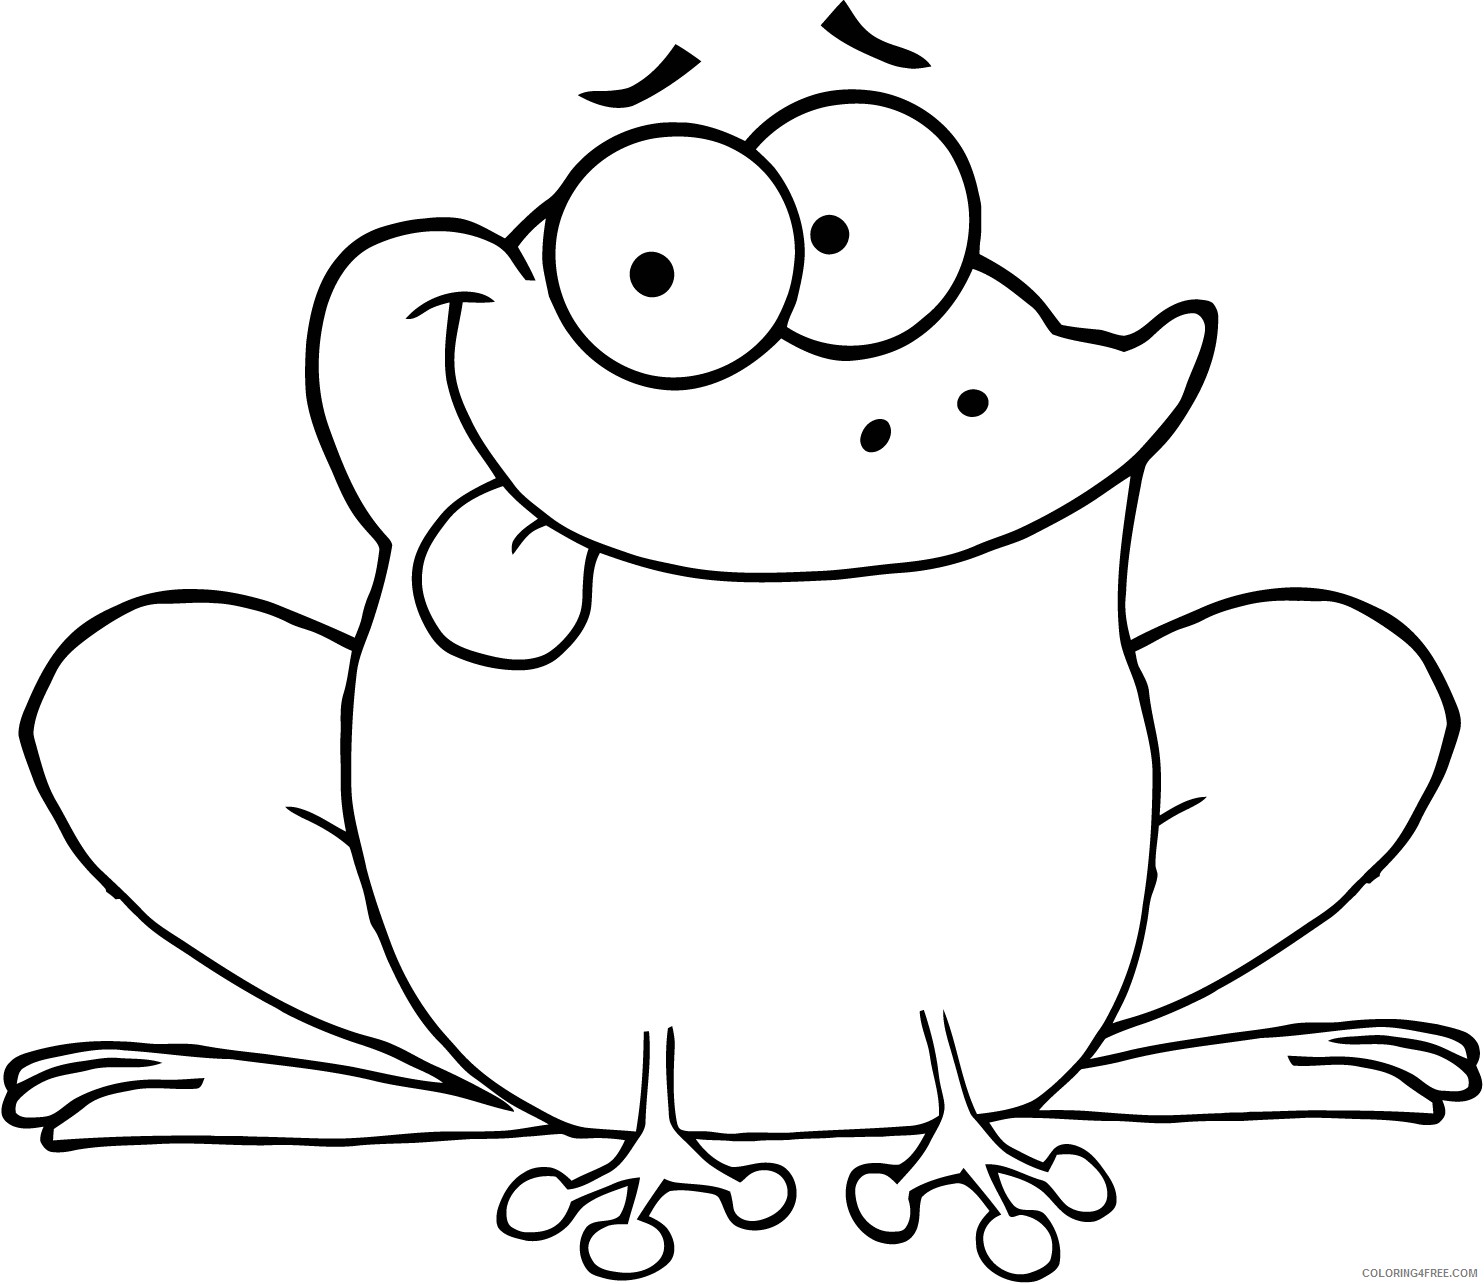 funny frog coloring pages Coloring4free